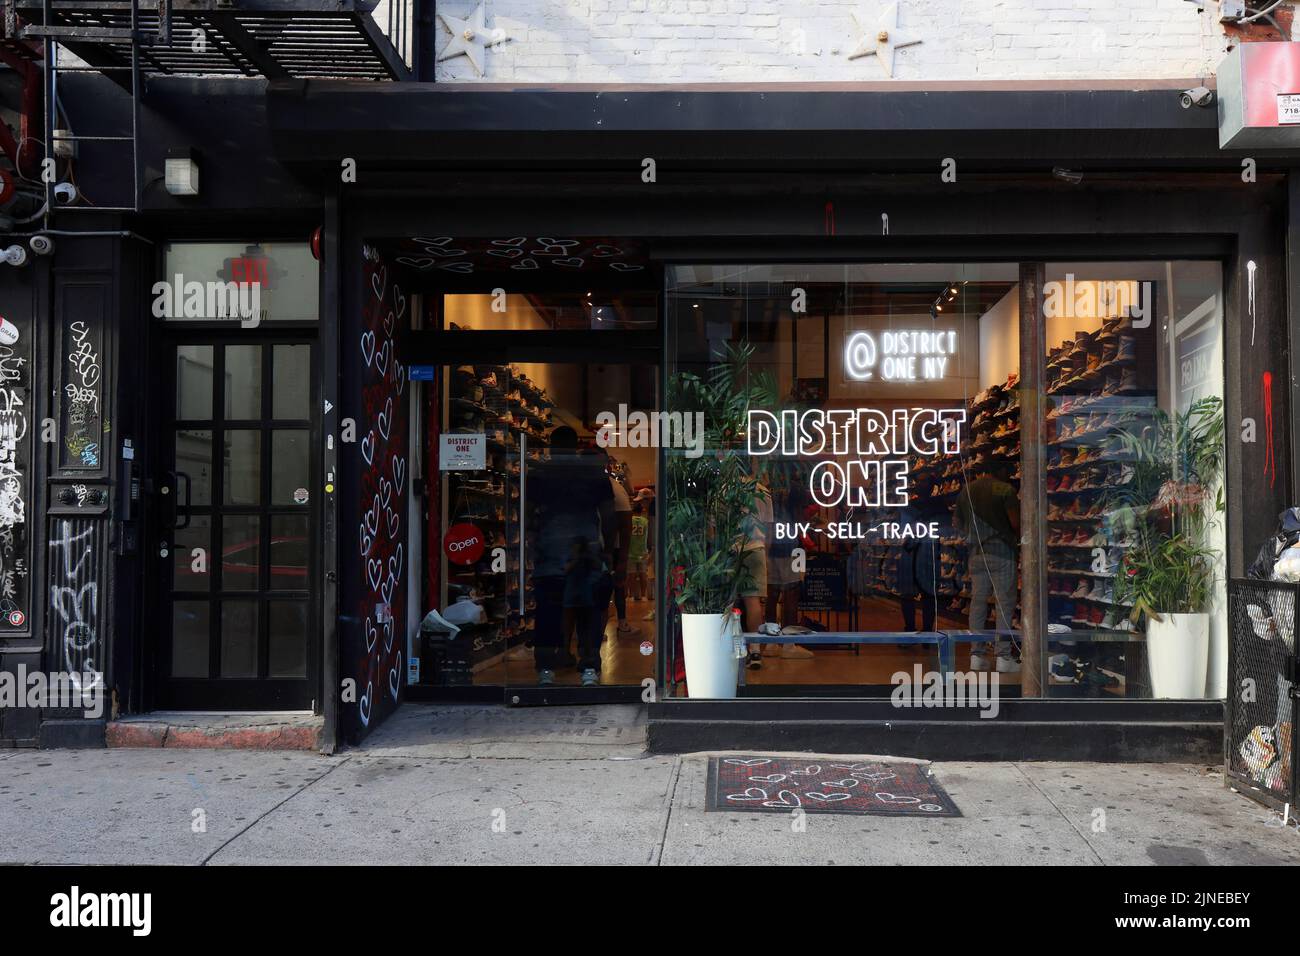 District One, 114 Stanton St, New York, NY. exterior storefront of a sneaker store in Manhattan's Lower East Side neighborhood. Stock Photo